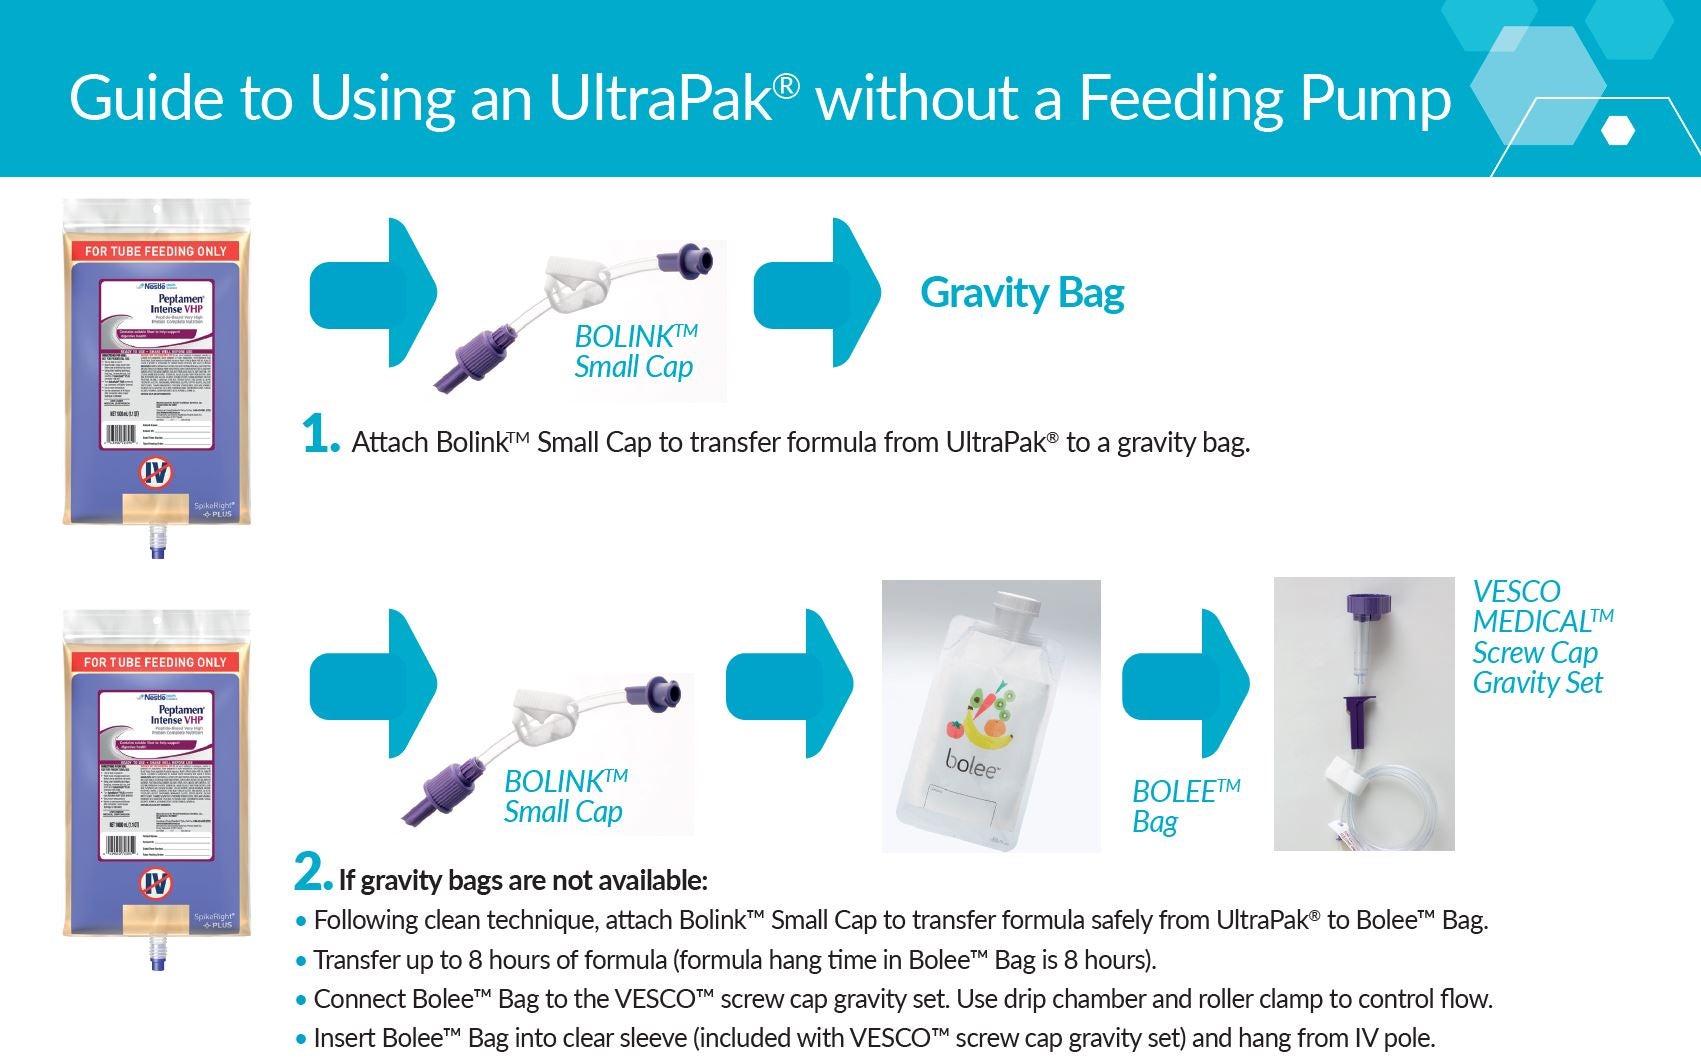 Guide to Using UltraPak without a Feeding Pump